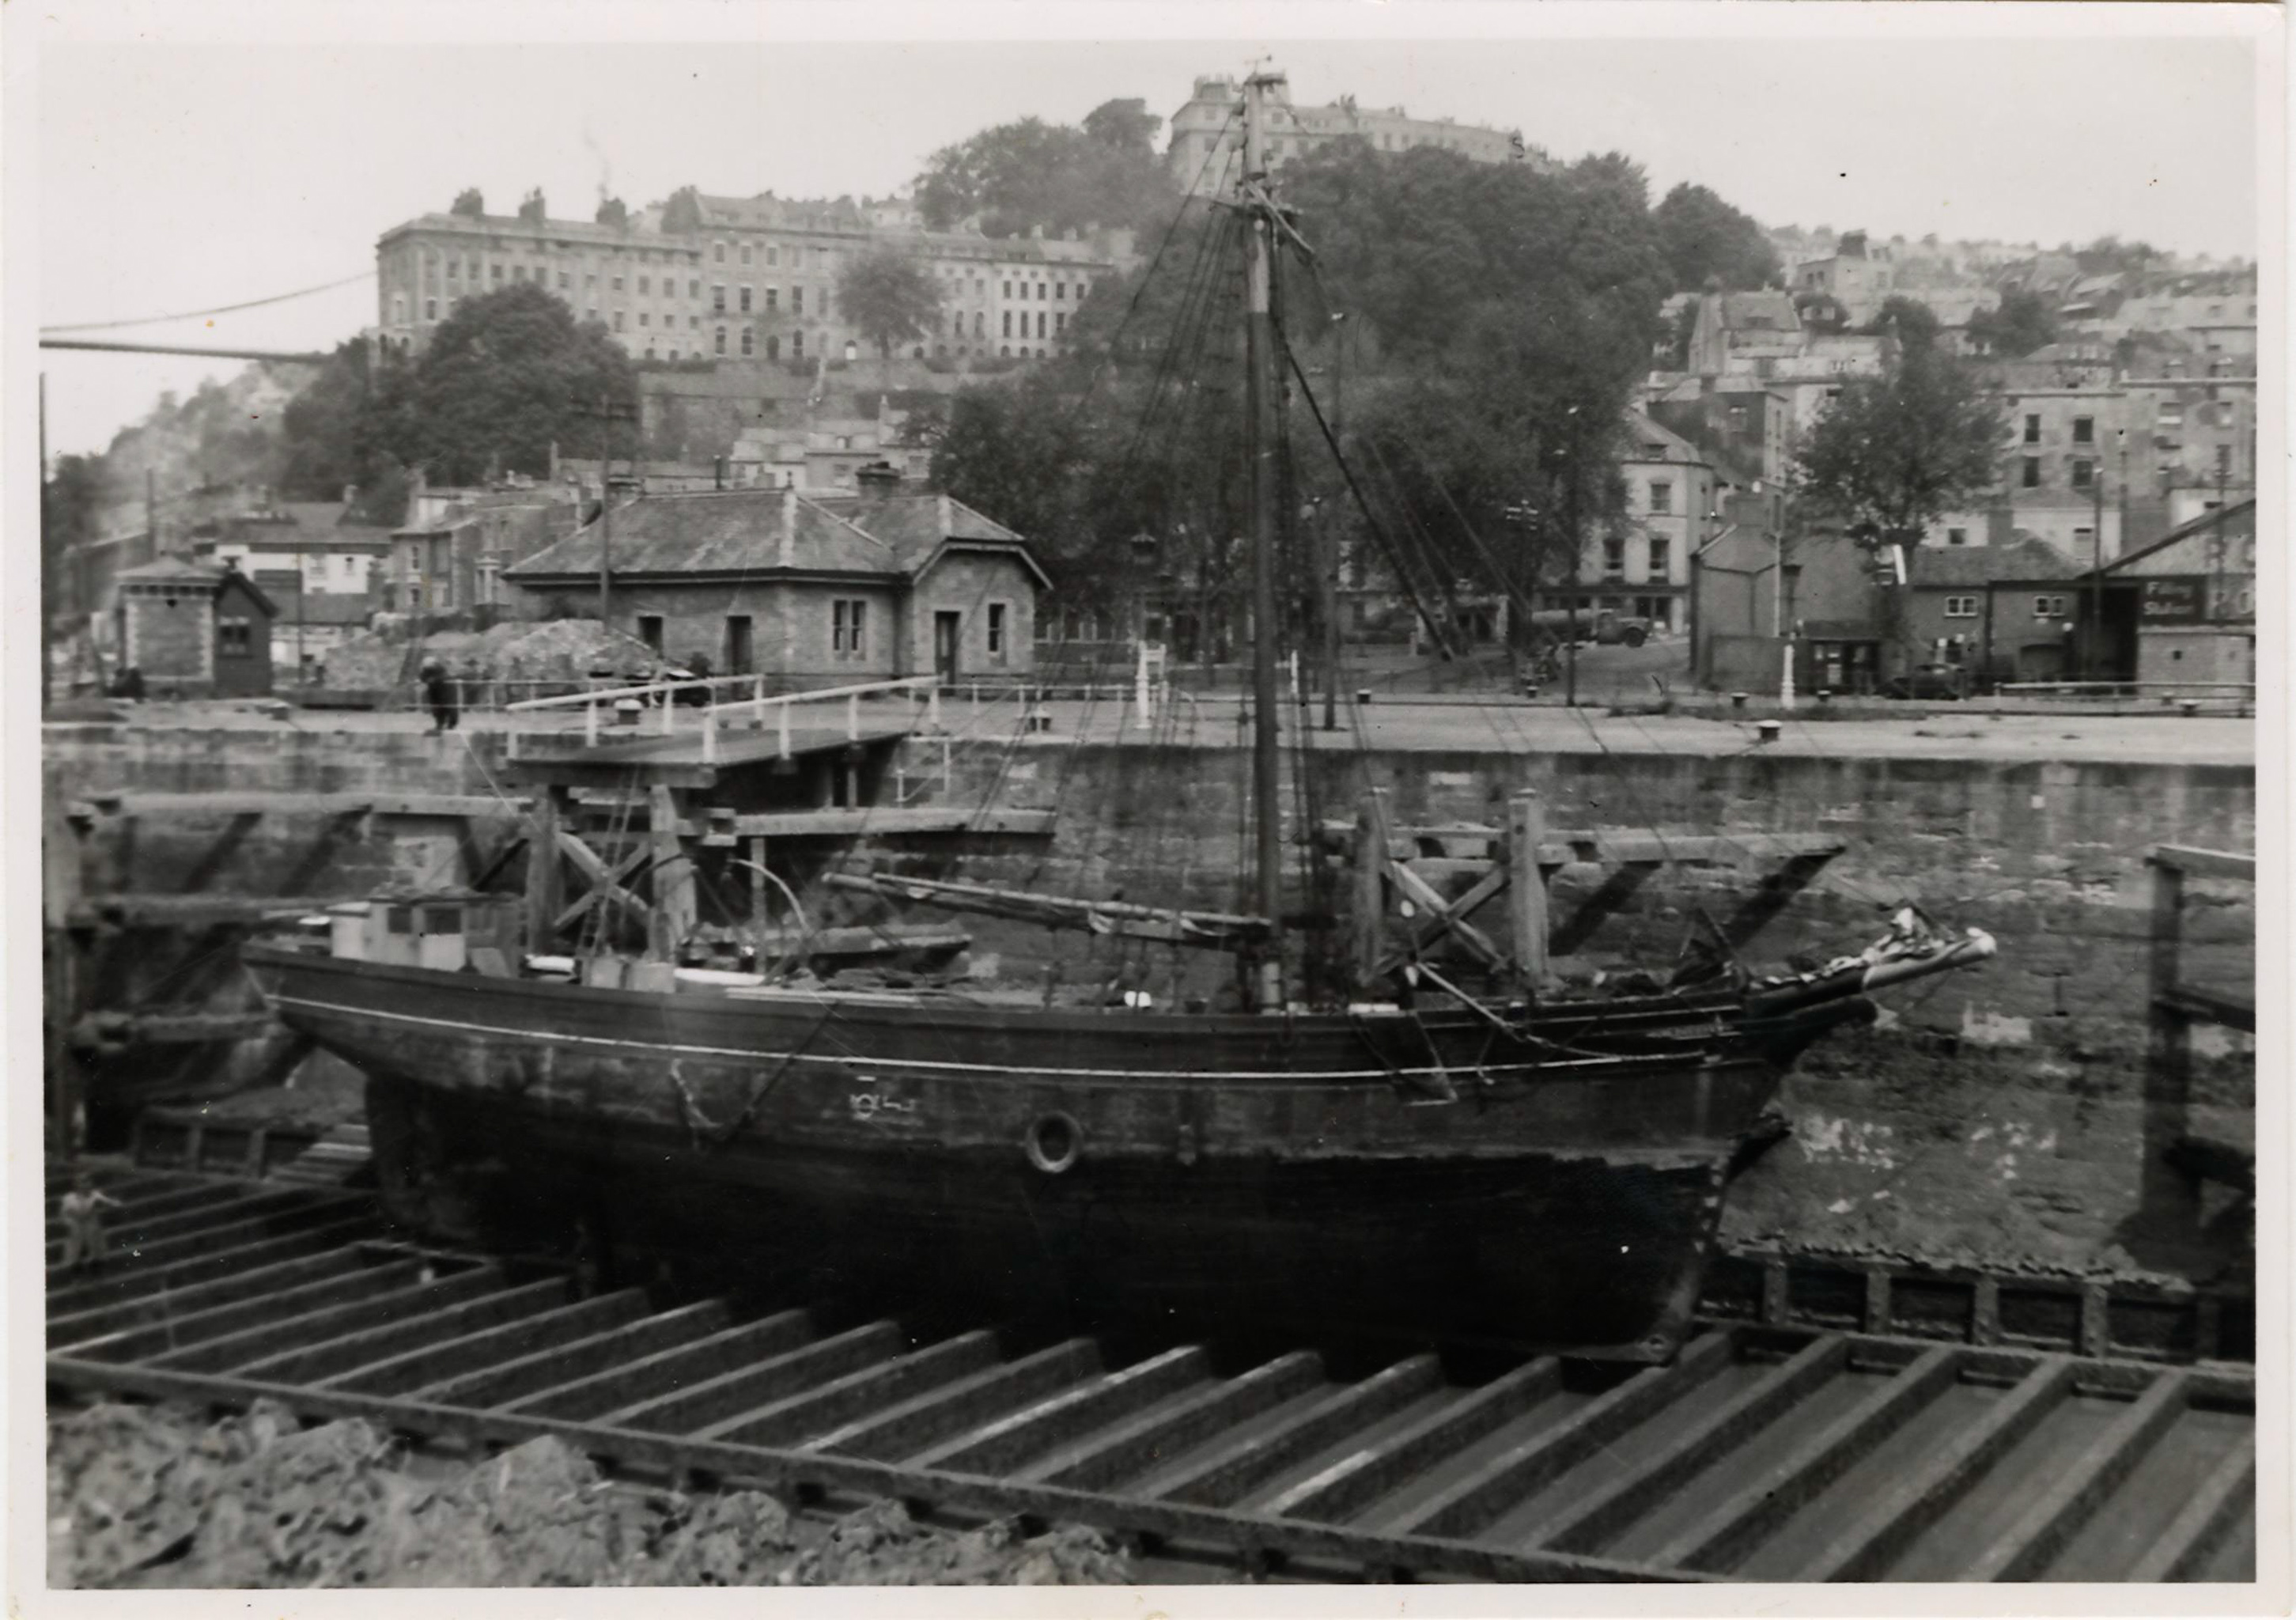 Motor vessel Gold Seeker on the gridiron outside Bristol City do
Here's the best photo of the Gridiron I've found so far: Item PG/3596 in the Isle of Man Photographic Archives.  

The photo is dated 14 May 1946 a...